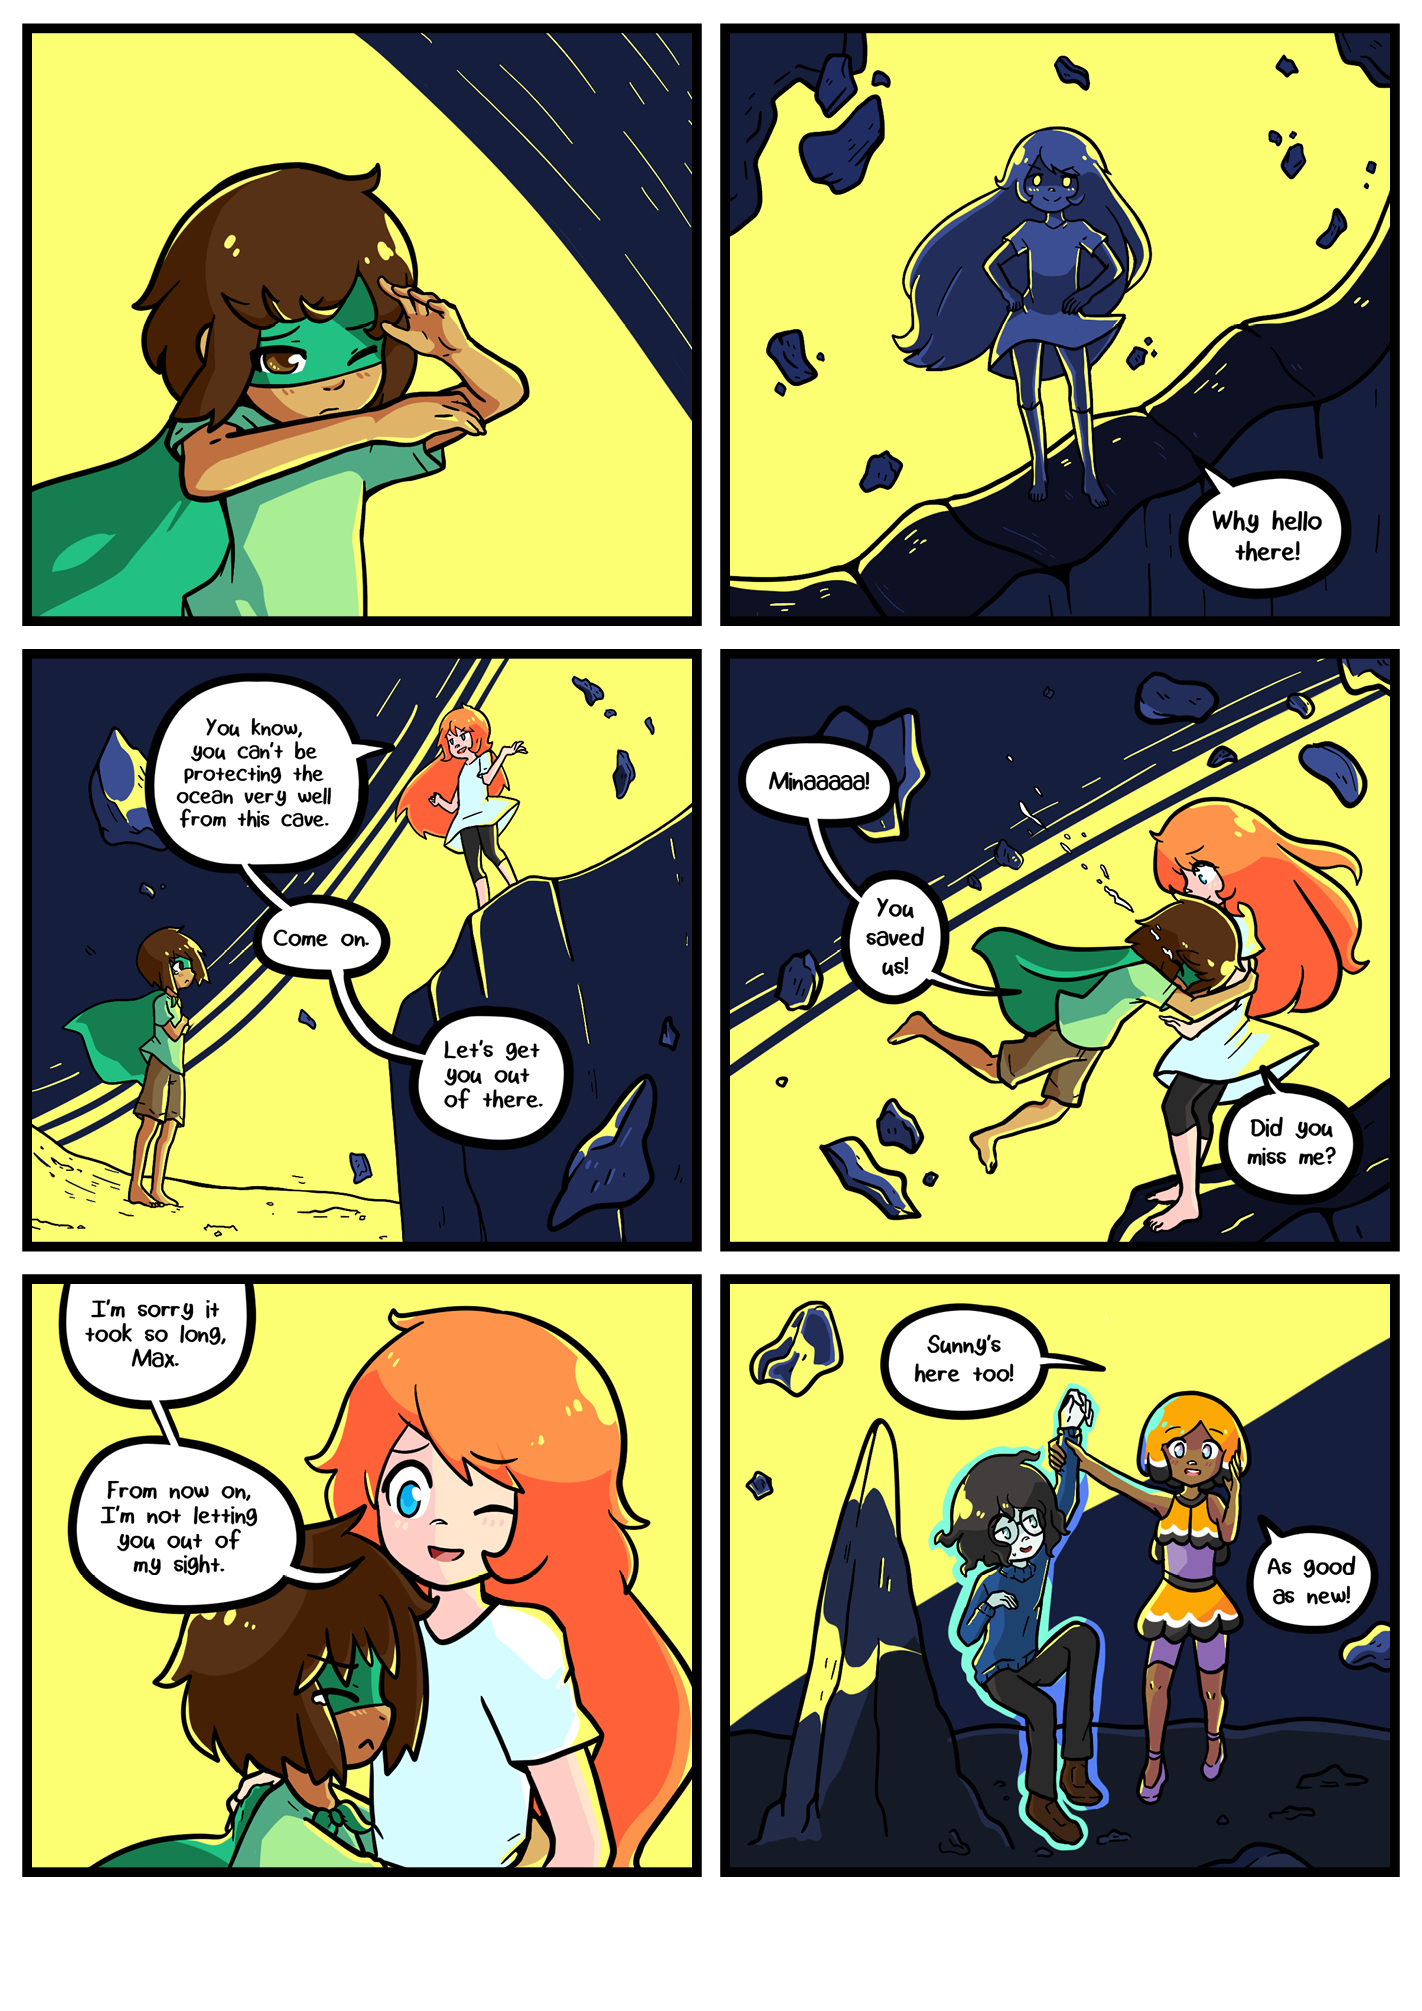 Seasick the underwater adventure comic, chapter 2 page 80 full